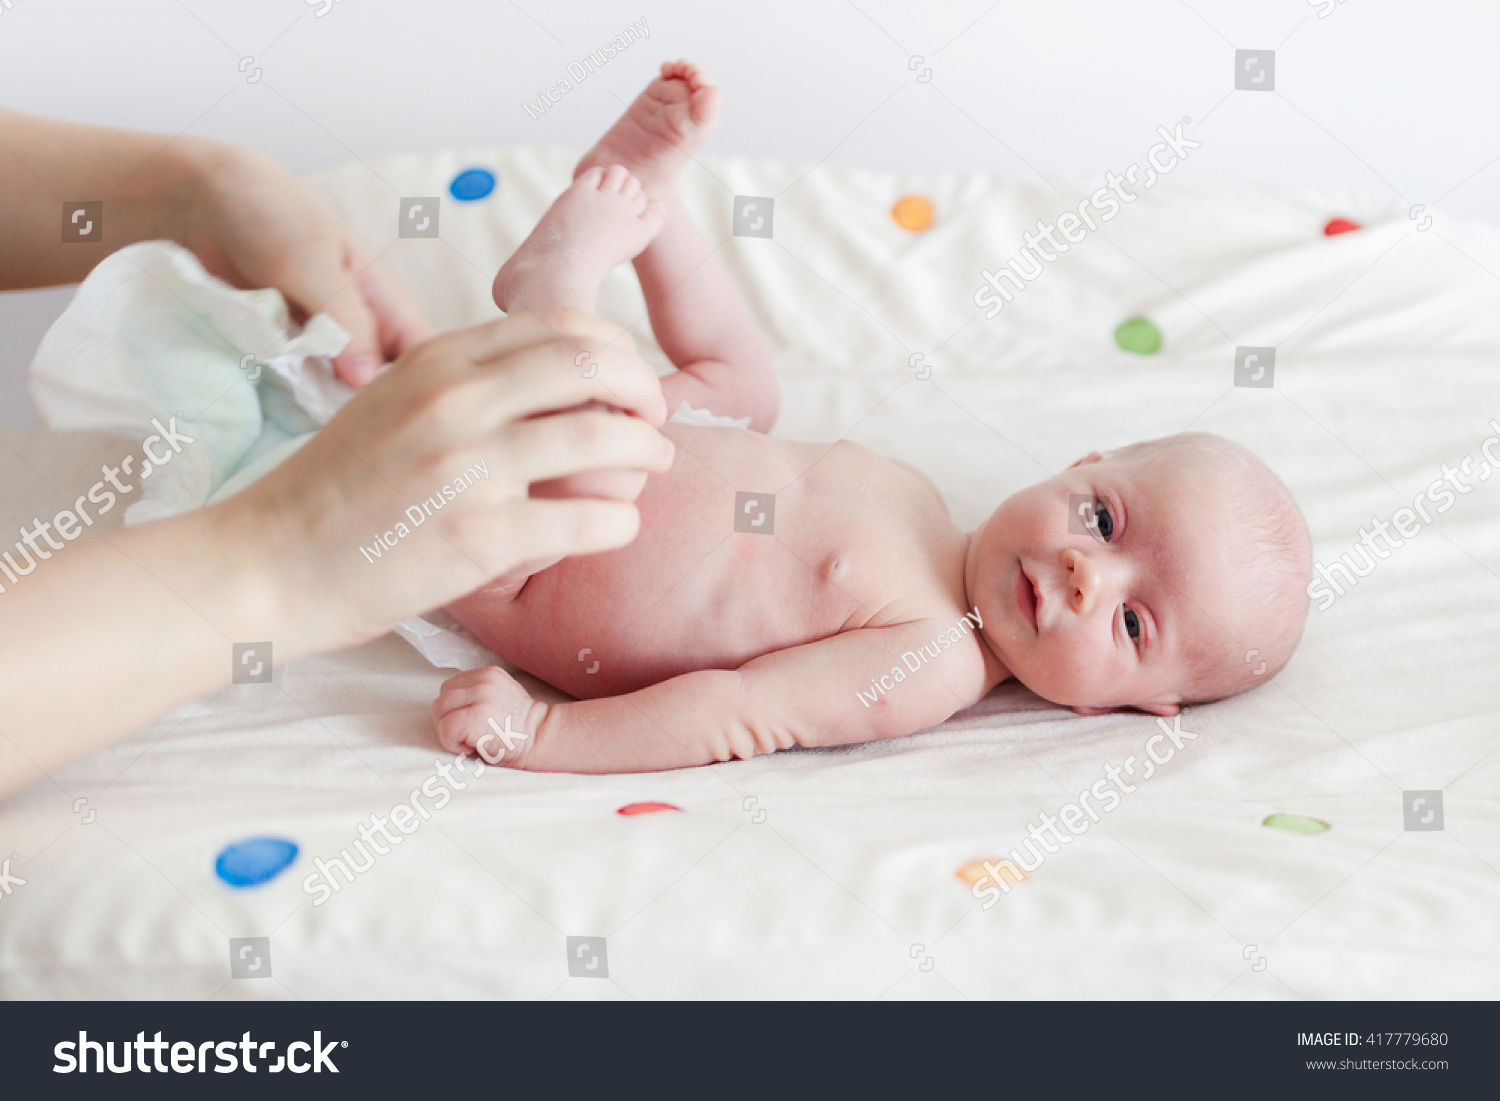 Naked girls babys Naked Baby Girl On Changing Table Stock Photo Edit Now 417779680